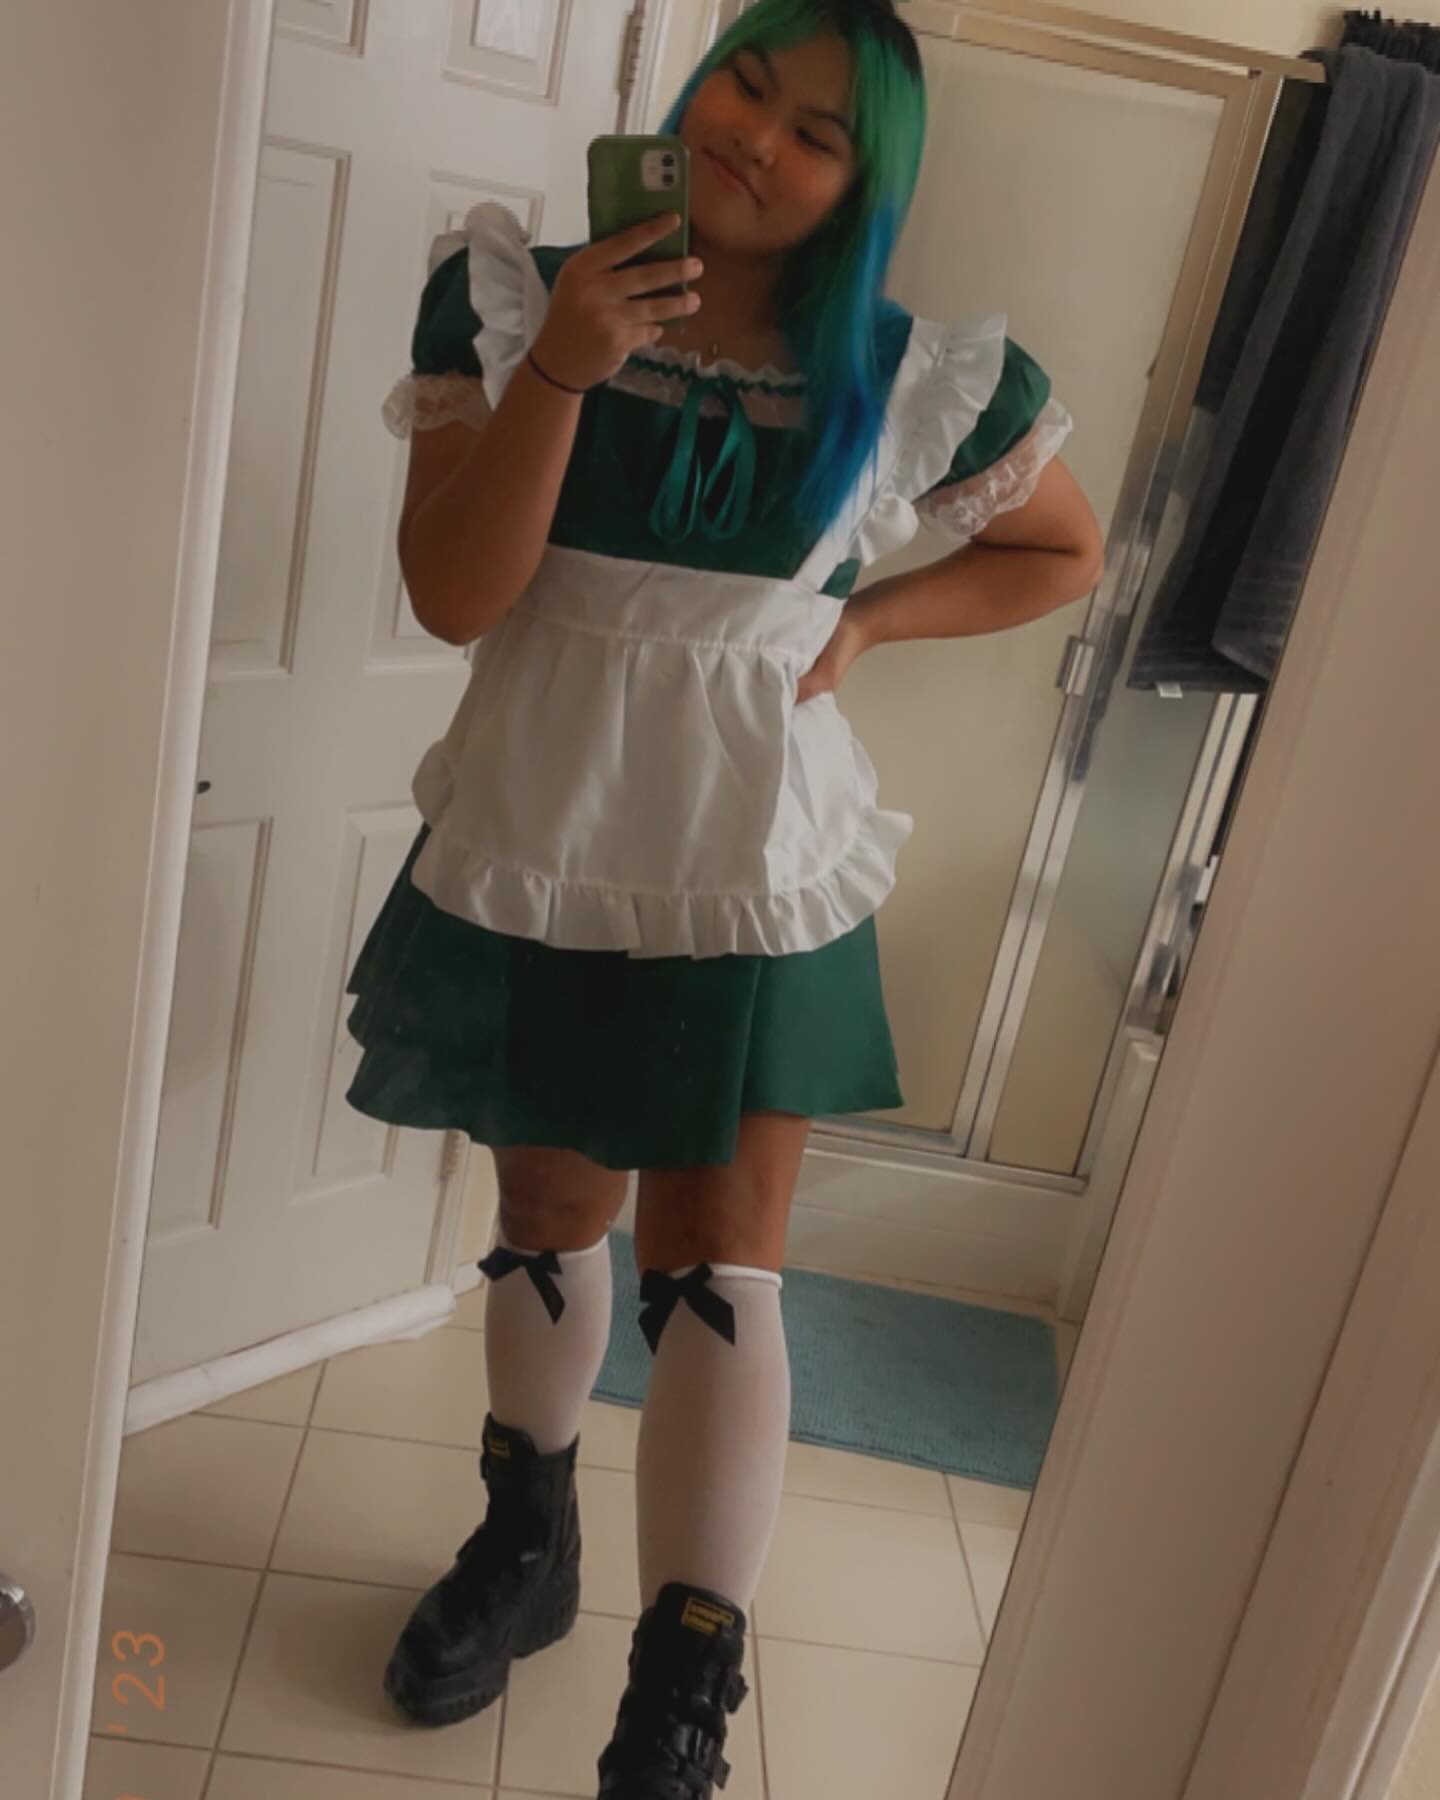 Your Greenest Maid is here, at your service!! So, what is your first request?? 🥰💚✨

Tags:

#maid #maidcosplay #maidcore #maidoutfit #maiddress #mirrorselfie #mirror #mirrorpic #happygirl #kneesocks #cosplay #cosplaygirl #filipina